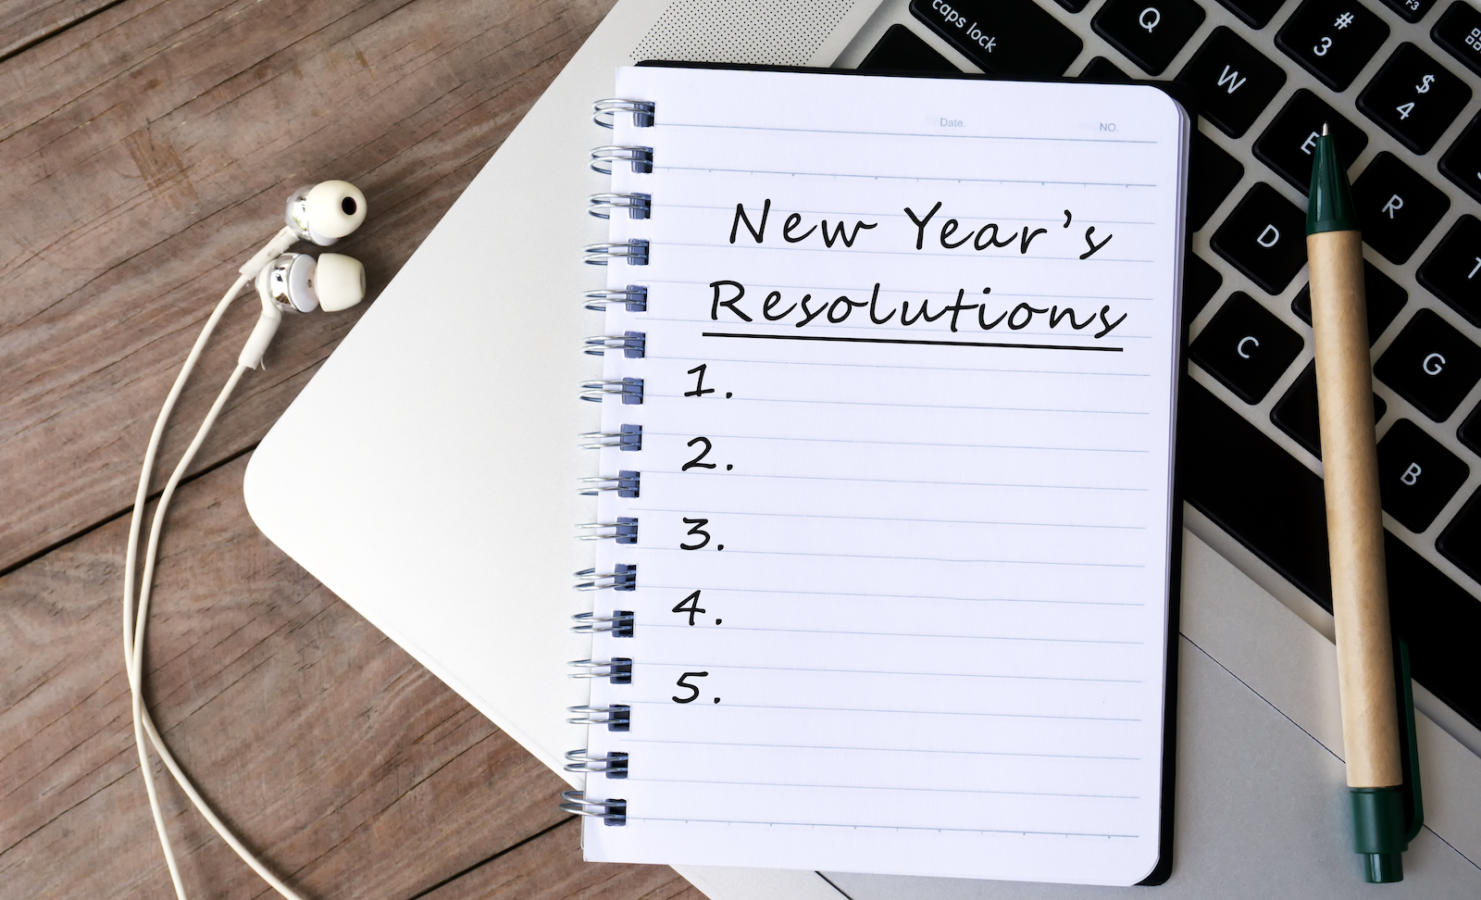 The Jewish Way To Make a New Year's Resolution - My Jewish Learning